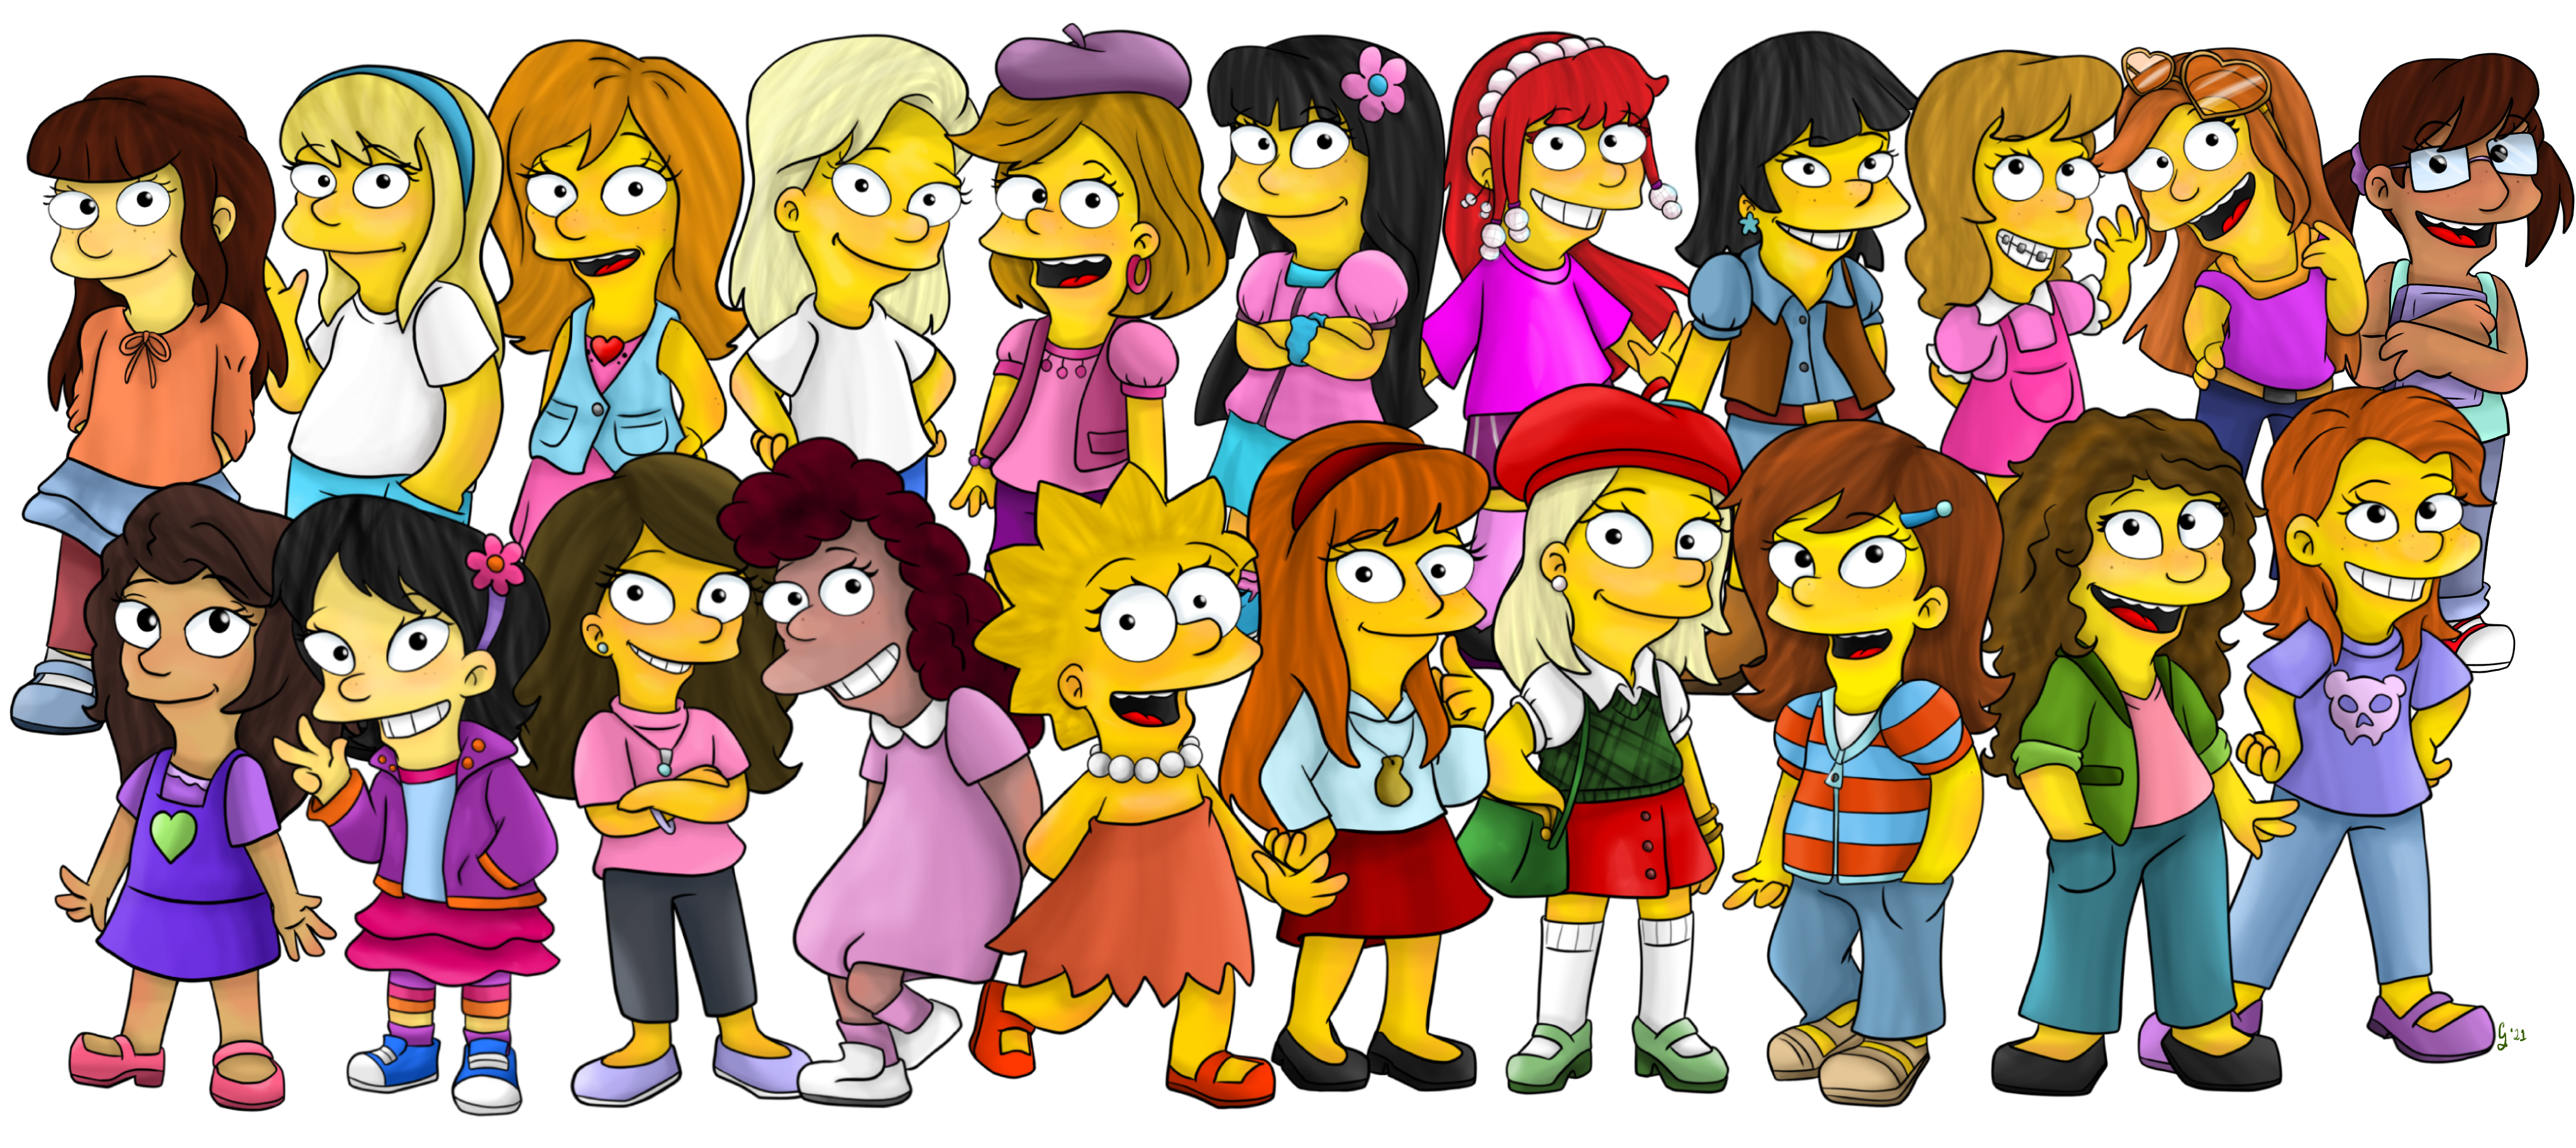 CC 'The Simpsons Movie' by bschulze on DeviantArt